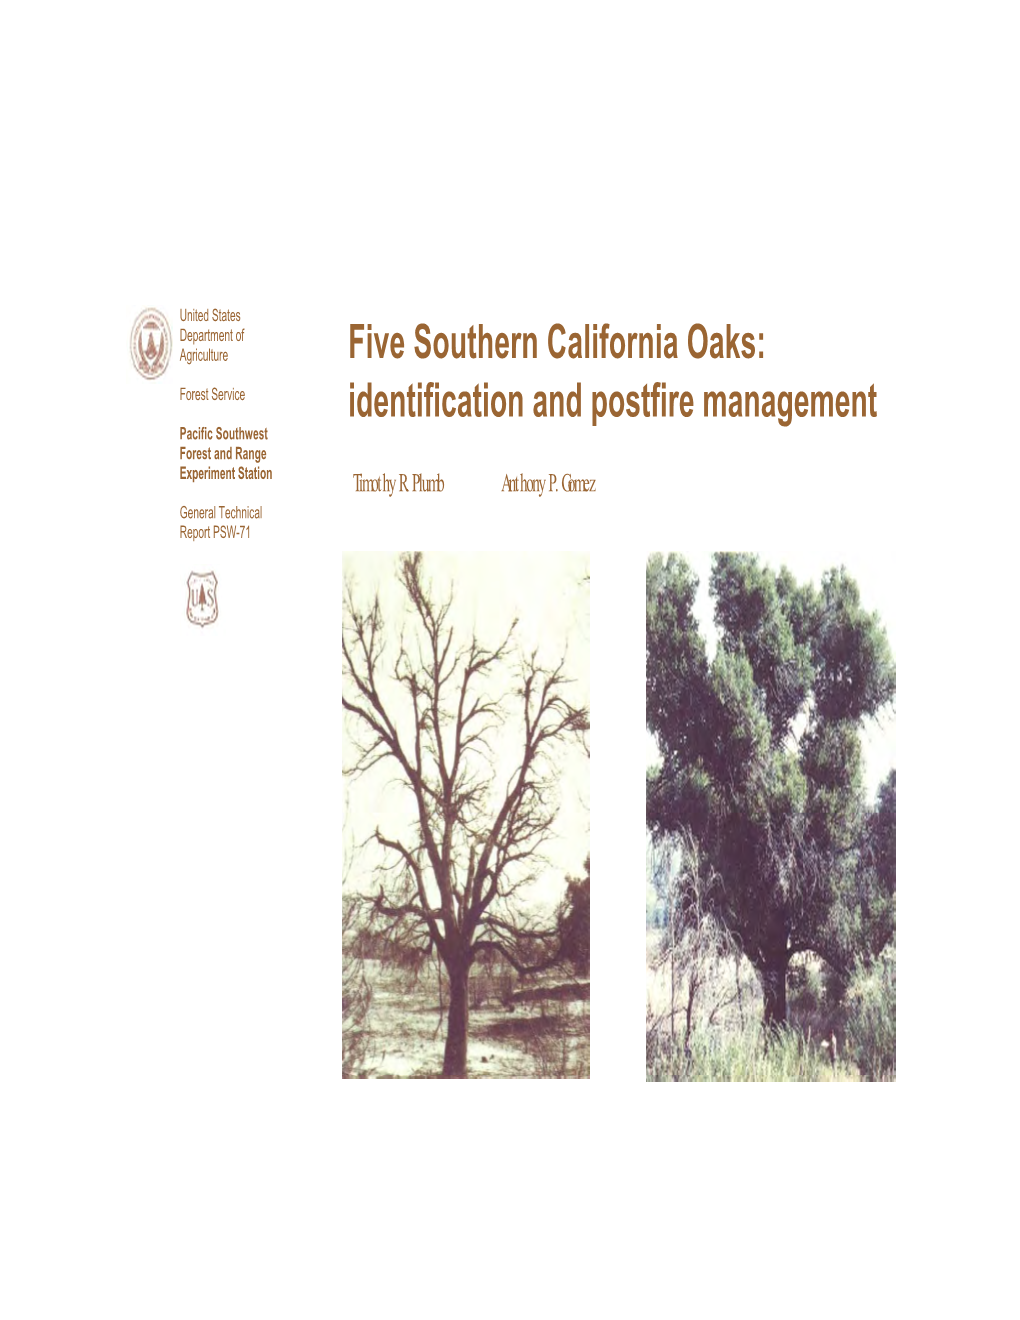 Five Southern California Oaks: Forest Service Identification and Postfire Management Pacific Southwest Forest and Range Experiment Station Timothy R